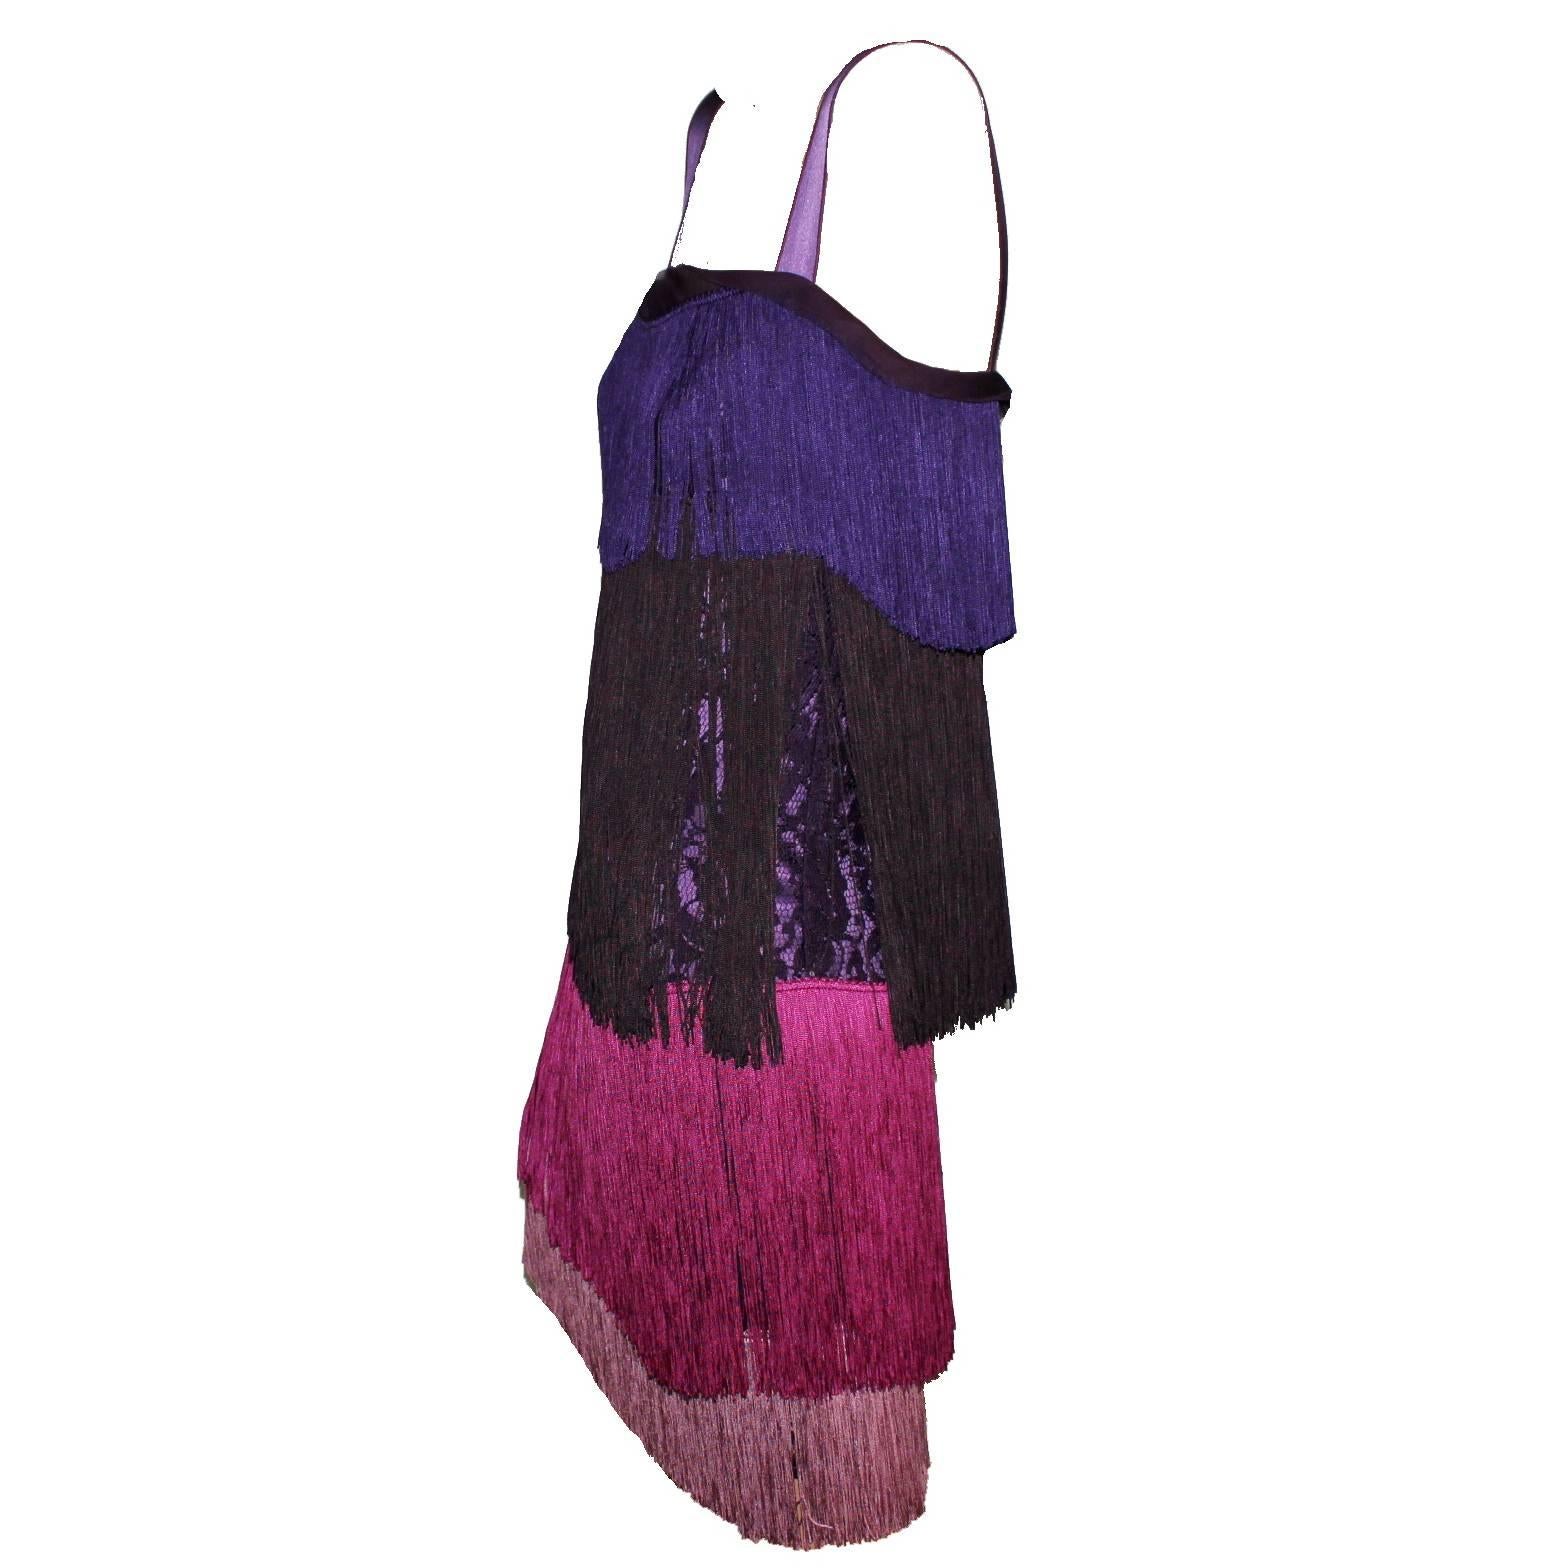 GORGEOUS DOLCE & GABBANA SILK FRINGE  DRESS

FLAPPER DRESS AS FROM THE MOVIE THE GREAT GATSBY



Made out of a purple lace fabric that shines through the fringes
Purple underdress
Colorblock fringes
Size 40
Condition: Brandnew with tags
Retail price